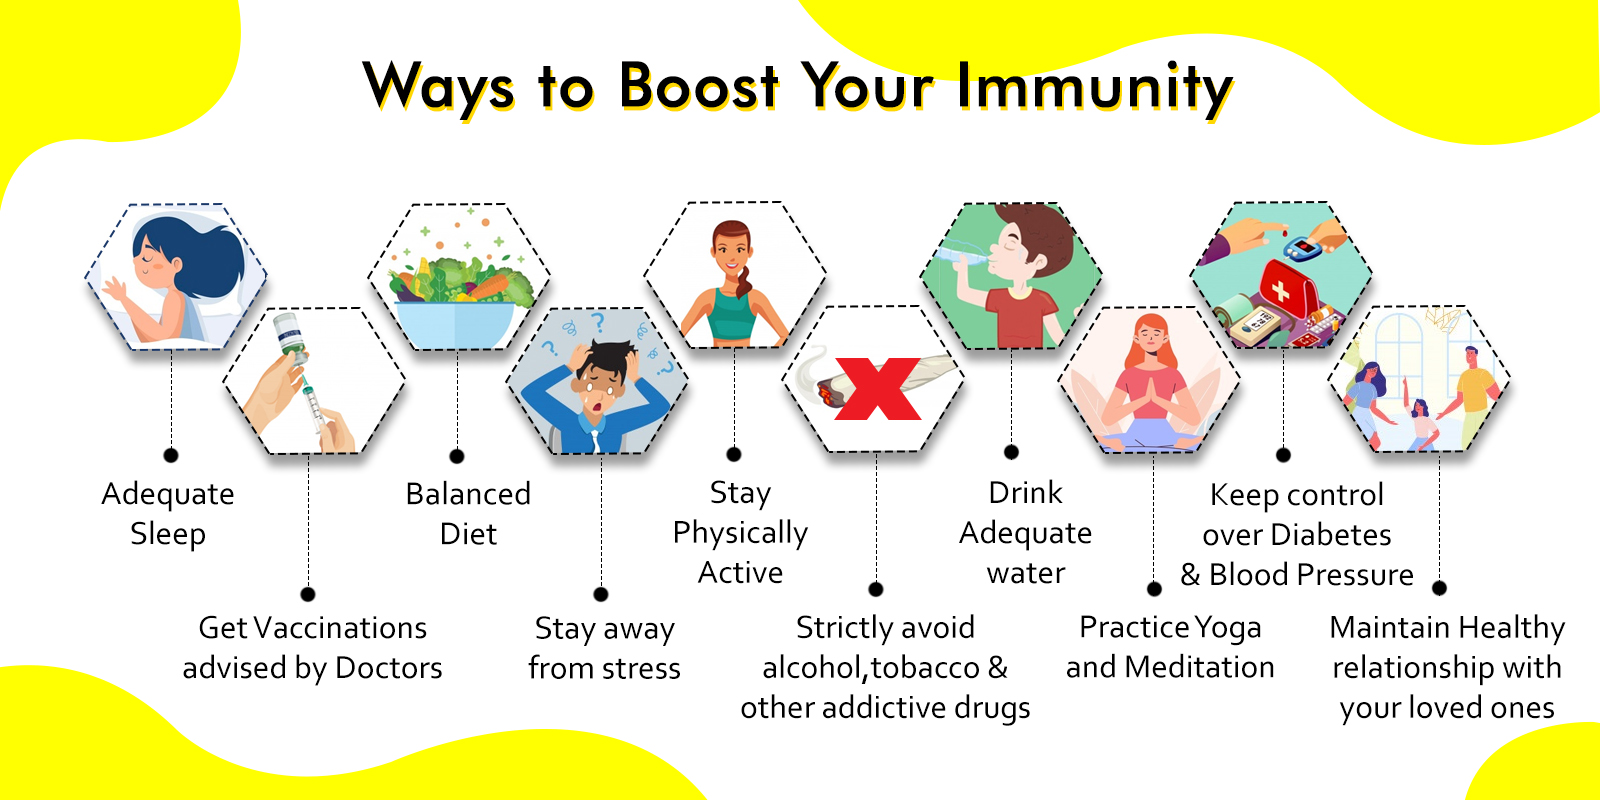 Boost Your Immunity